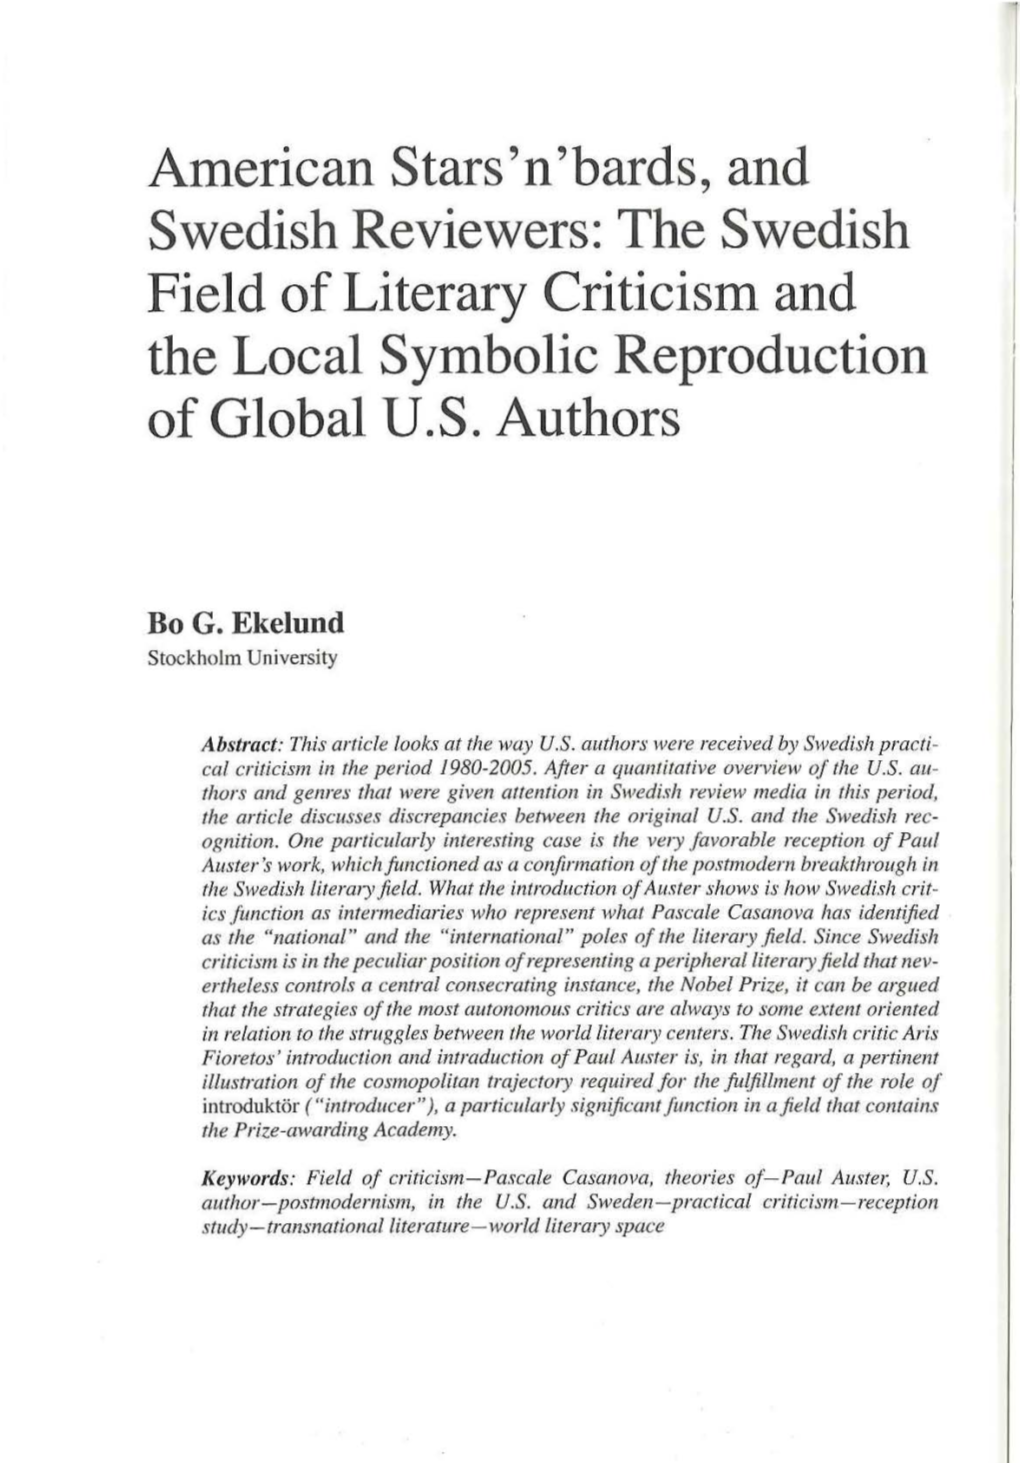 The Swedish Field of Literary Criticism and the Local Symbolic Reproduction of Global U.S